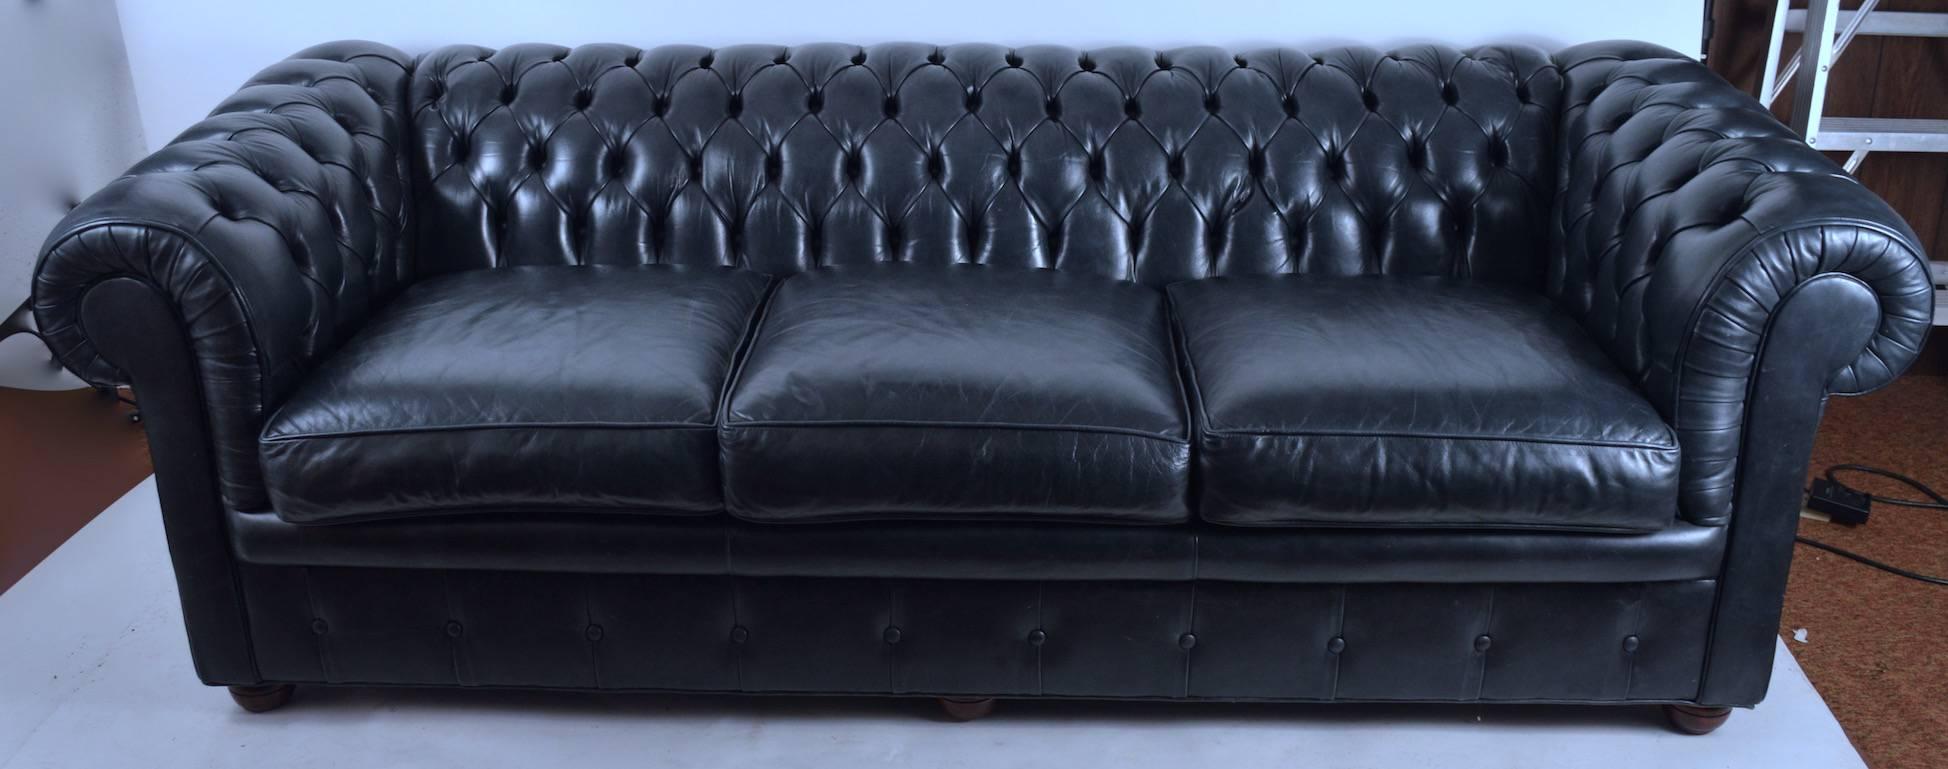 Midnight blue tufted leather Chesterfield sofa by 